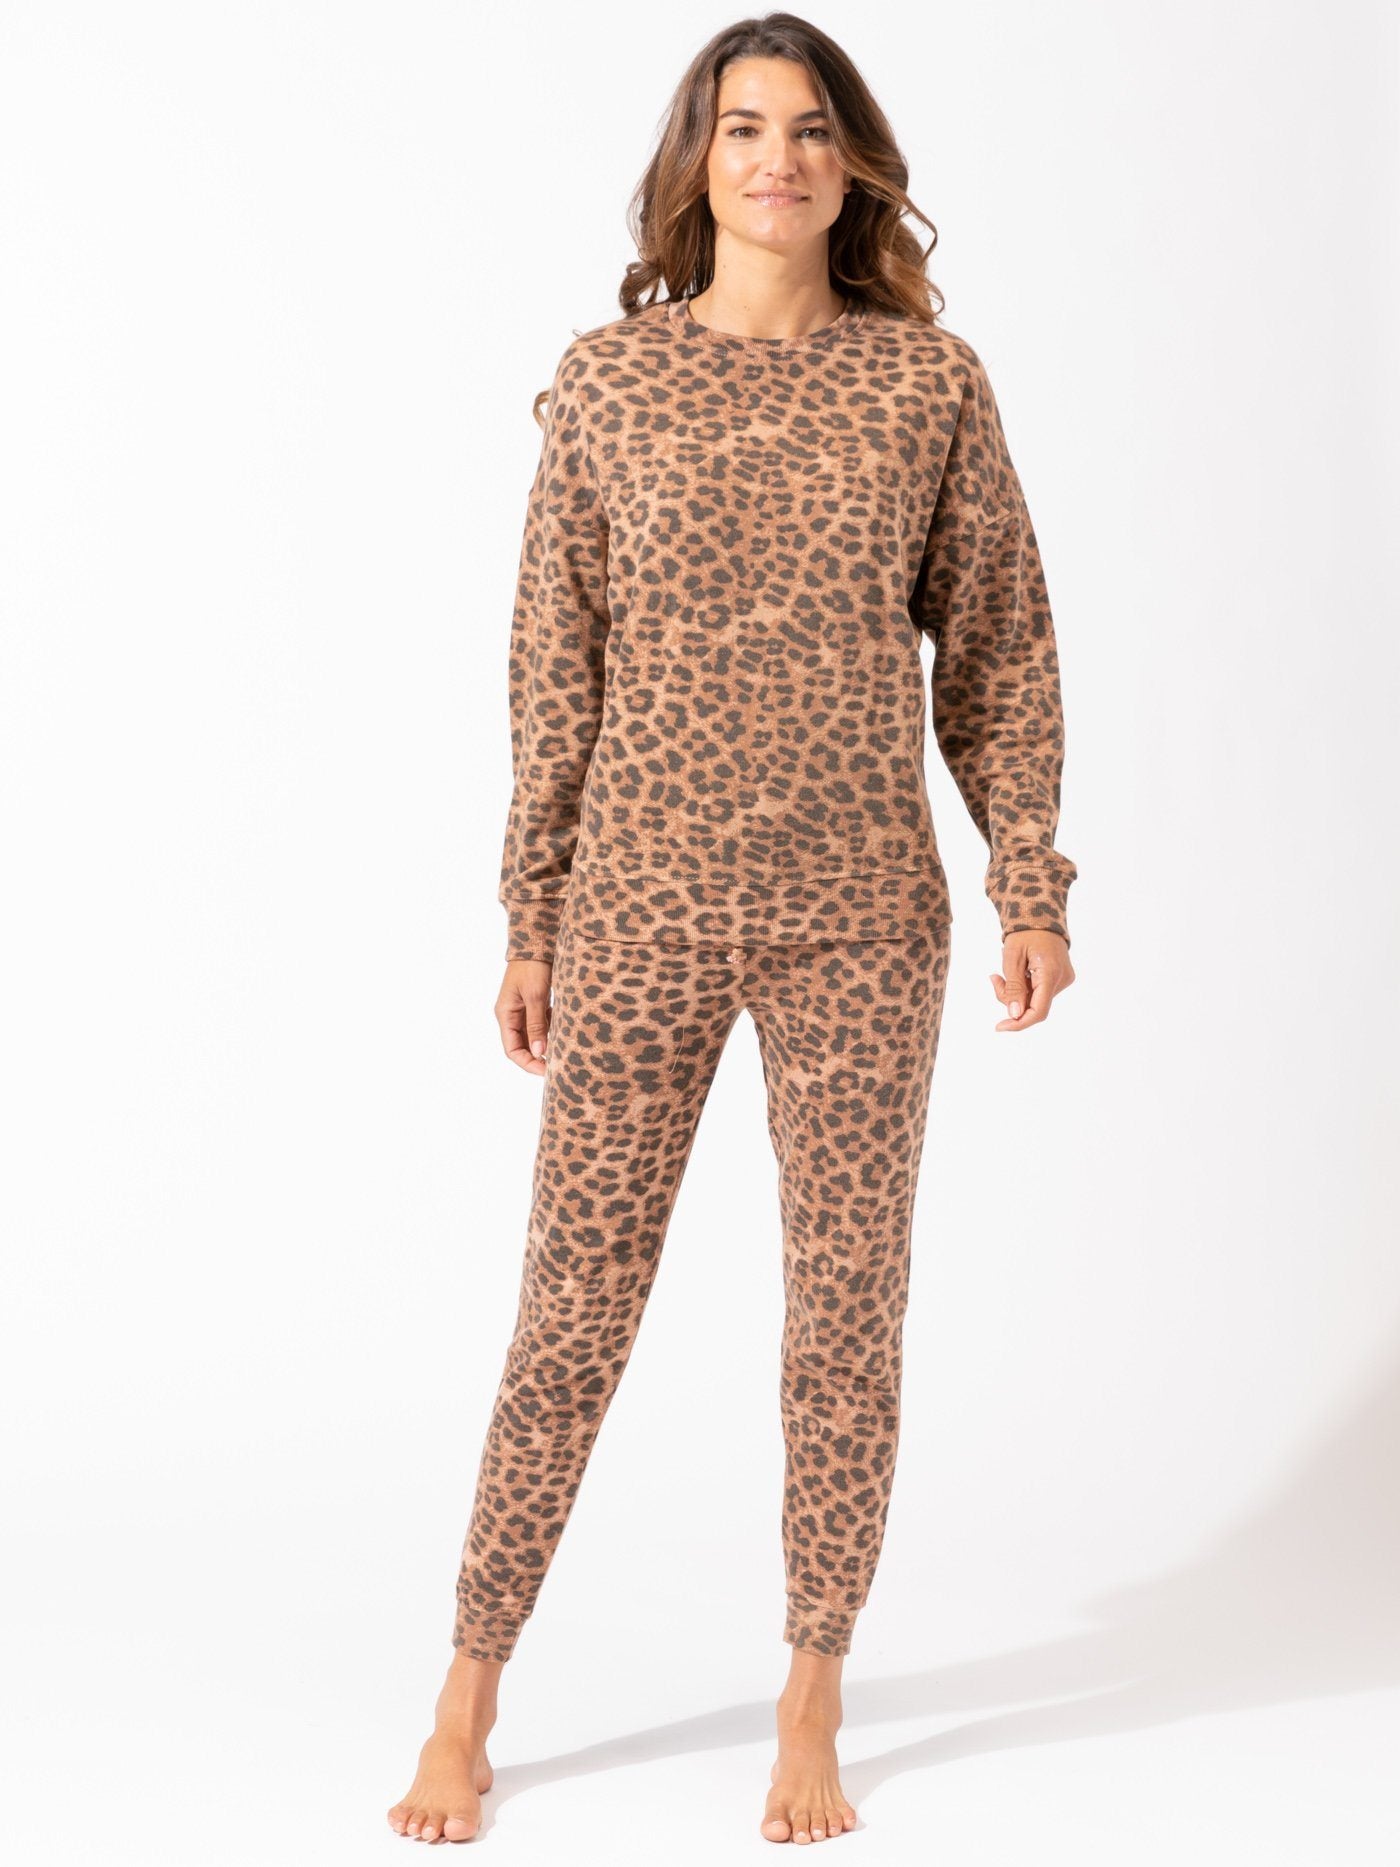 Cathy Leopard Print Oversized Crew Womens Tops Top Threads 4 Thought 